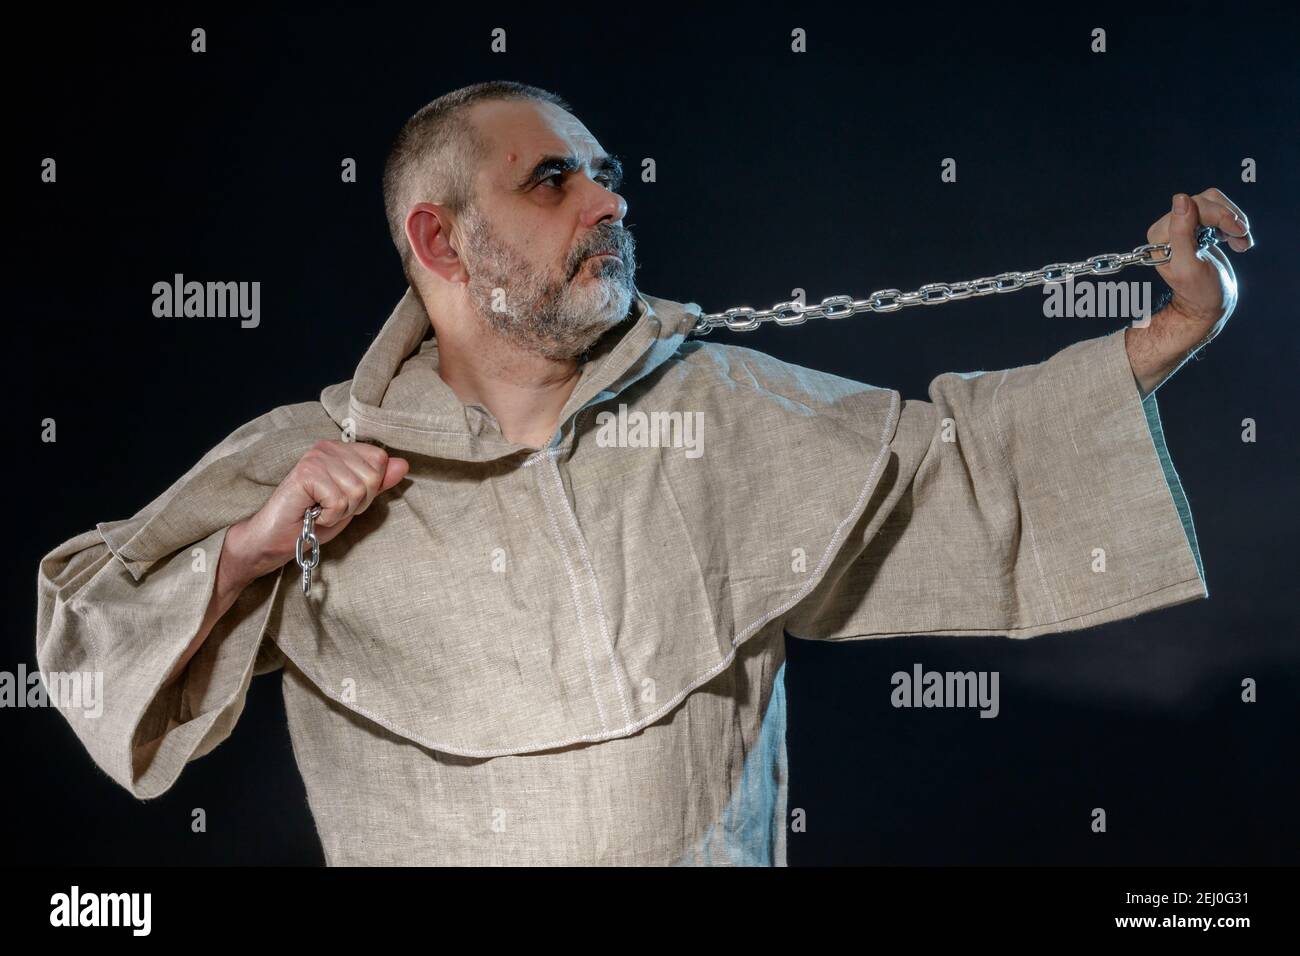 A wandering militant monk practicing a martial art with a chain in his hands Stock Photo